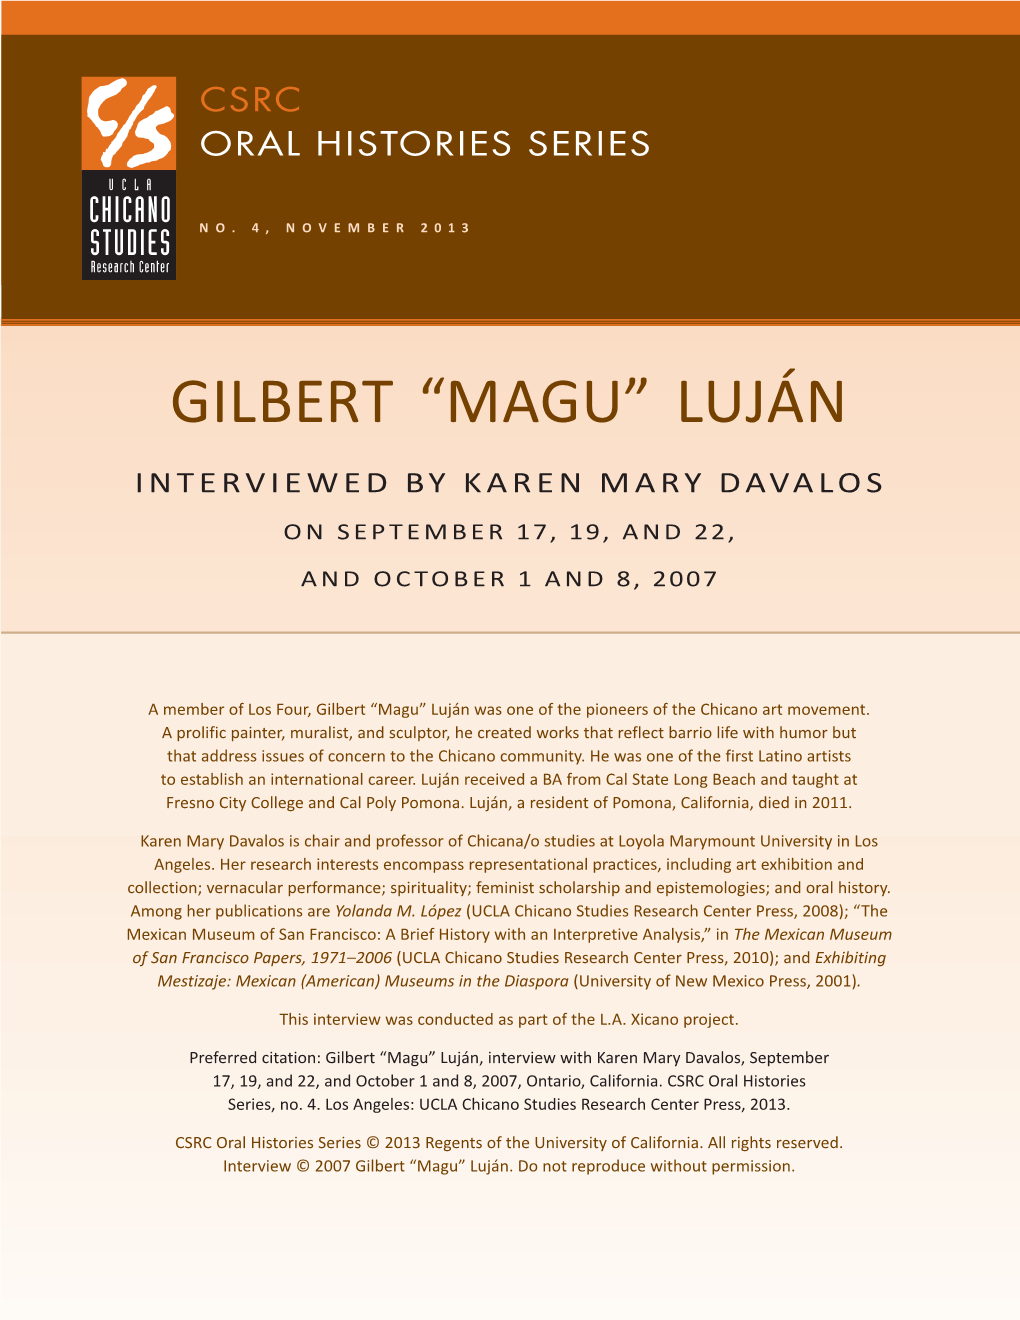 Gilbert “Magu” Luján Interviewed by Karen Mary Davalos on September 17, 19, and 22, and October 1 and 8, 2007